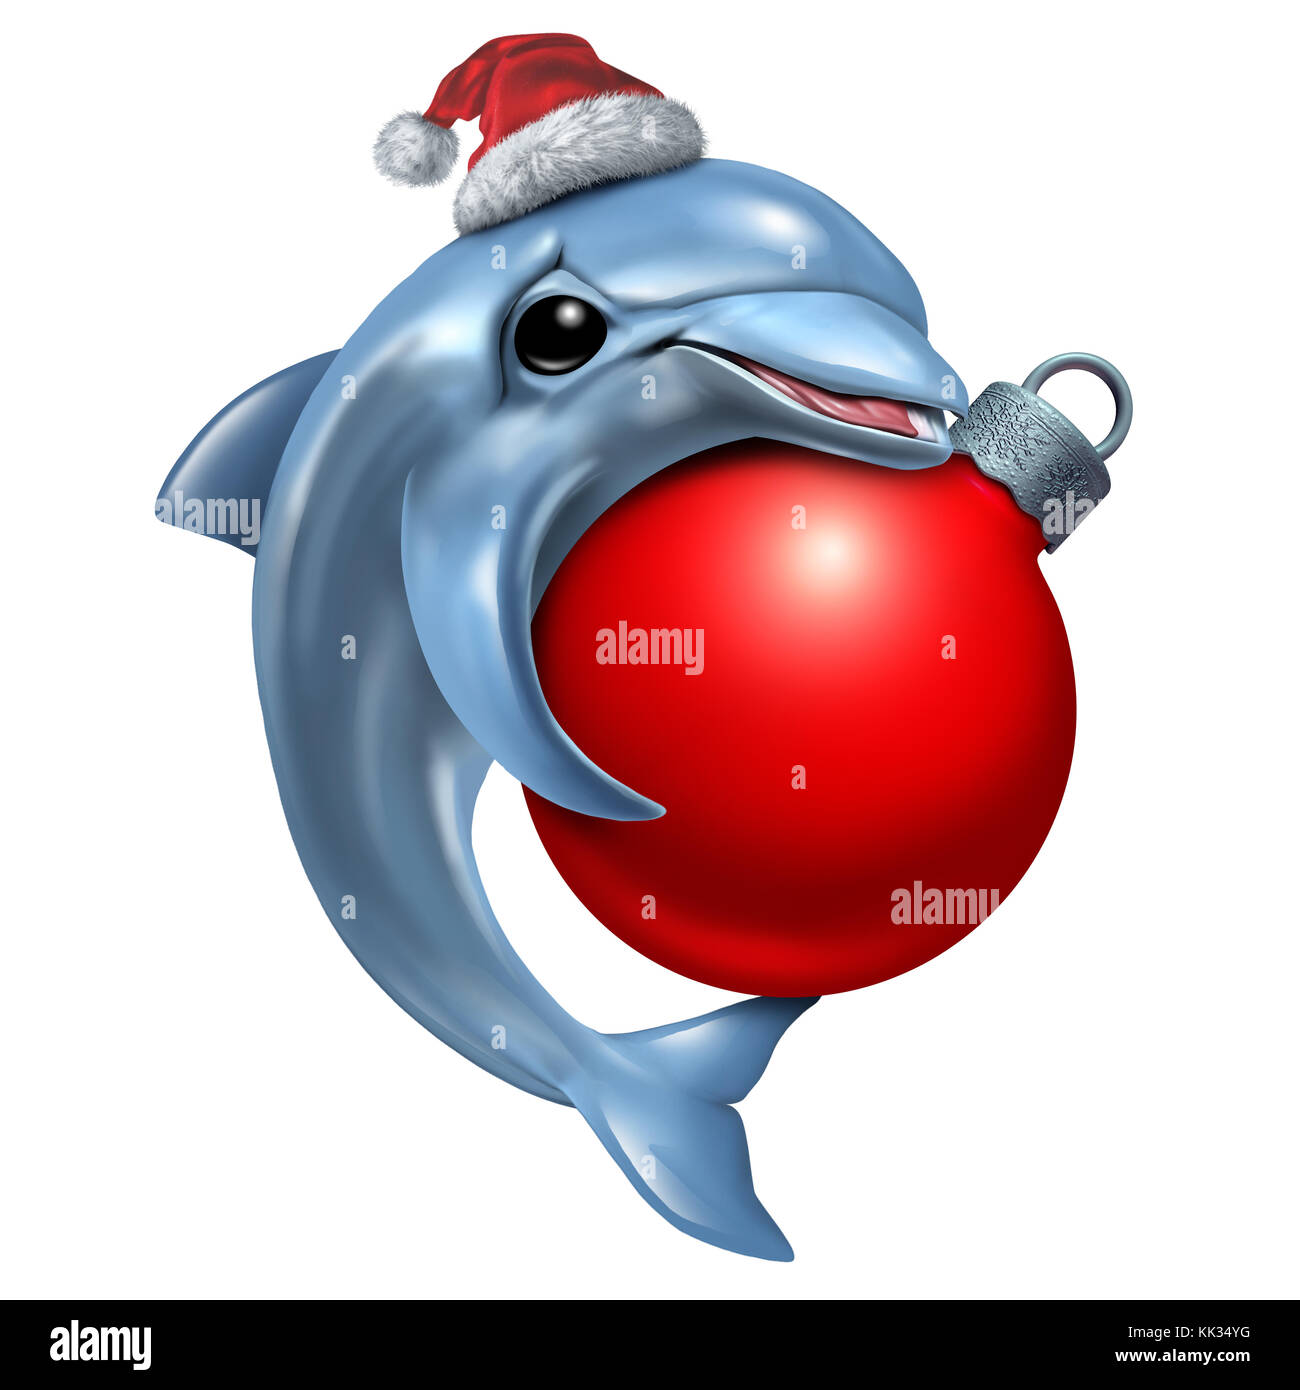 Cute Christmas Dolphin holding a winter celebration xmas decoration ball as a happy festive marine mammal with 3D illustration elements. Stock Photo